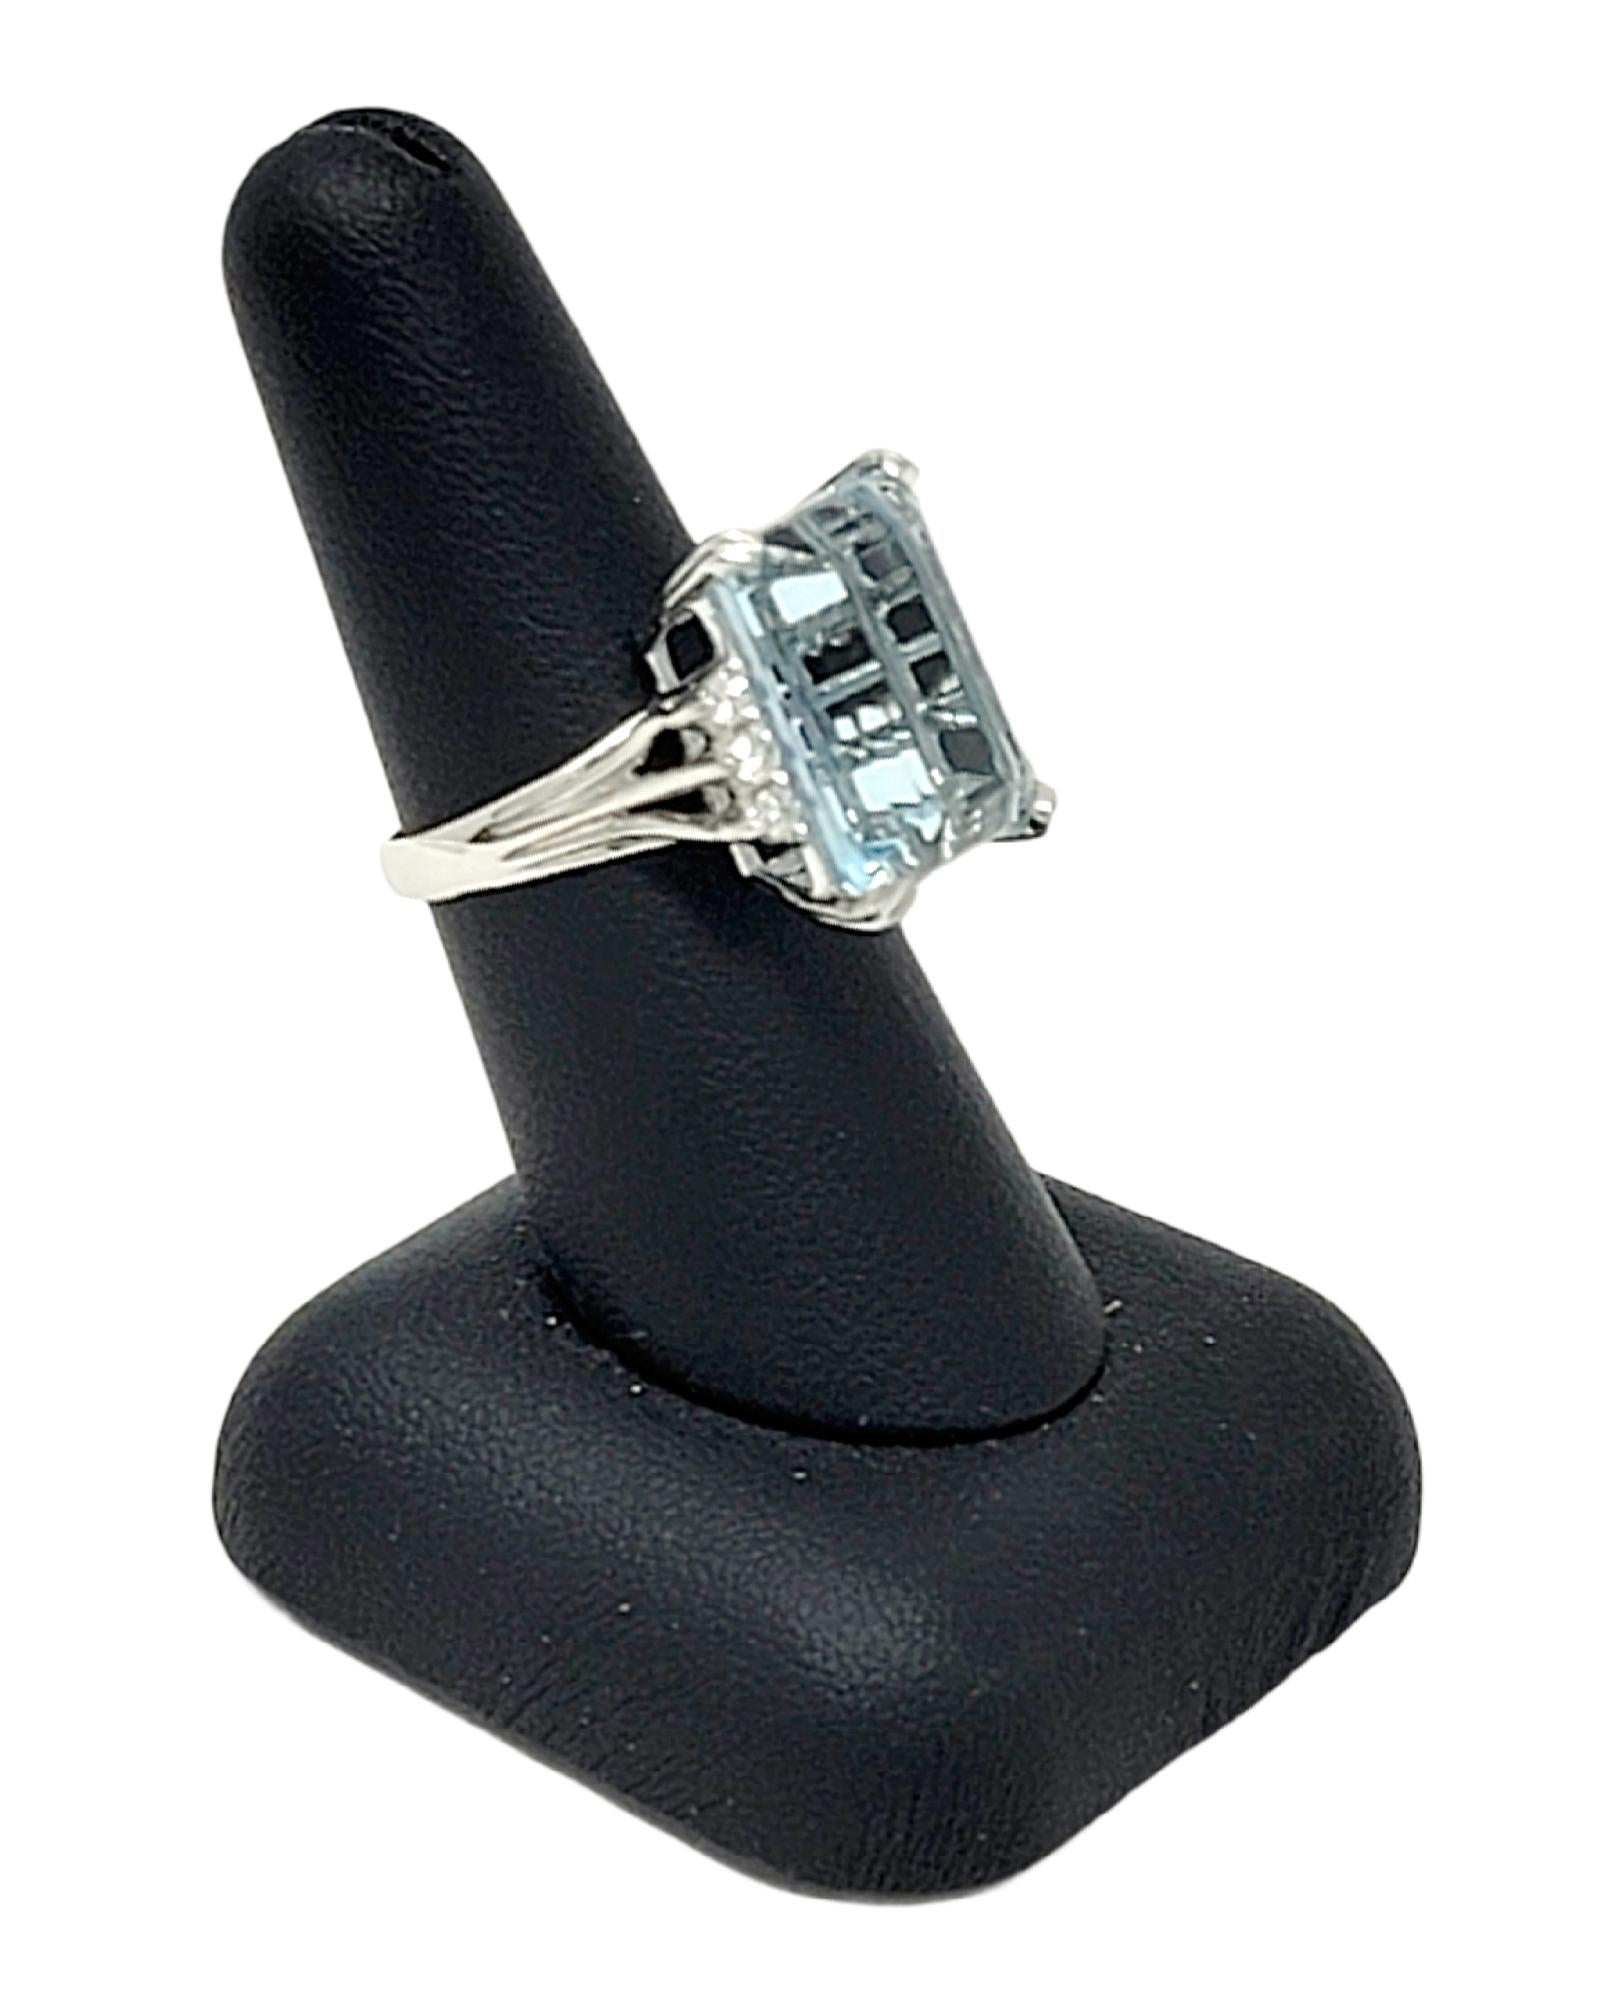 14.74 Carat Total Emerald Cut Aquamarine and Diamond Cocktail Ring 18 Karat Gold In Fair Condition For Sale In Scottsdale, AZ